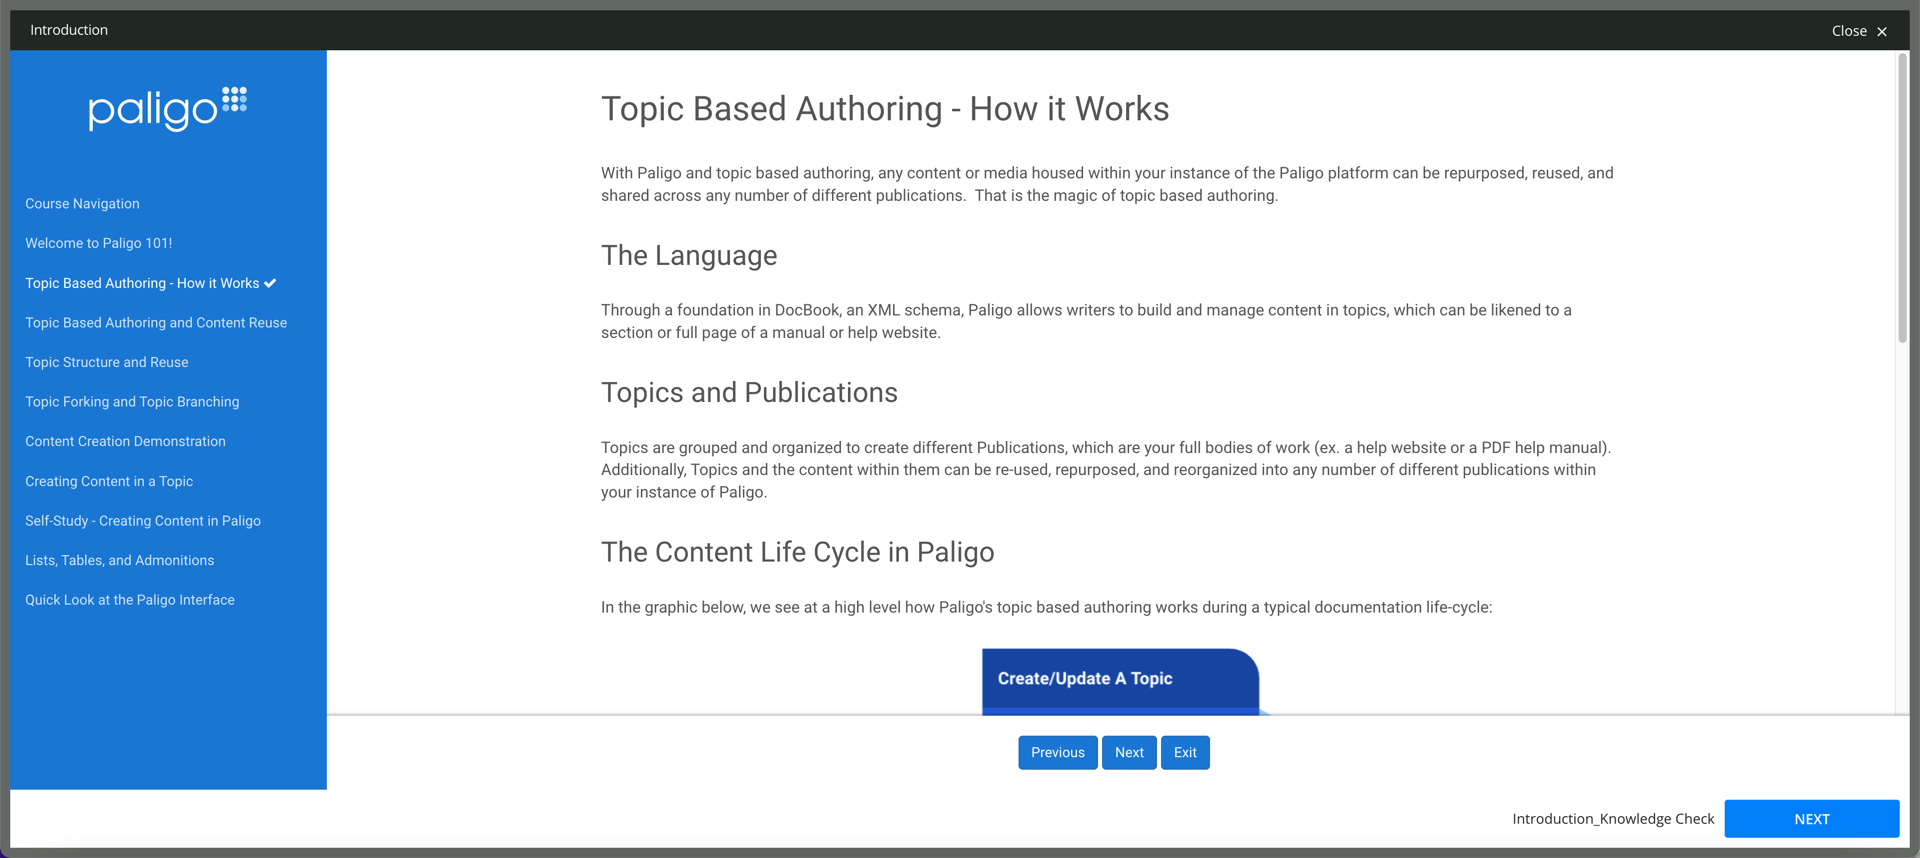 Example of an information topic. This topic is titled "Topic Based Authoring - How it Works" and it contains text and images.